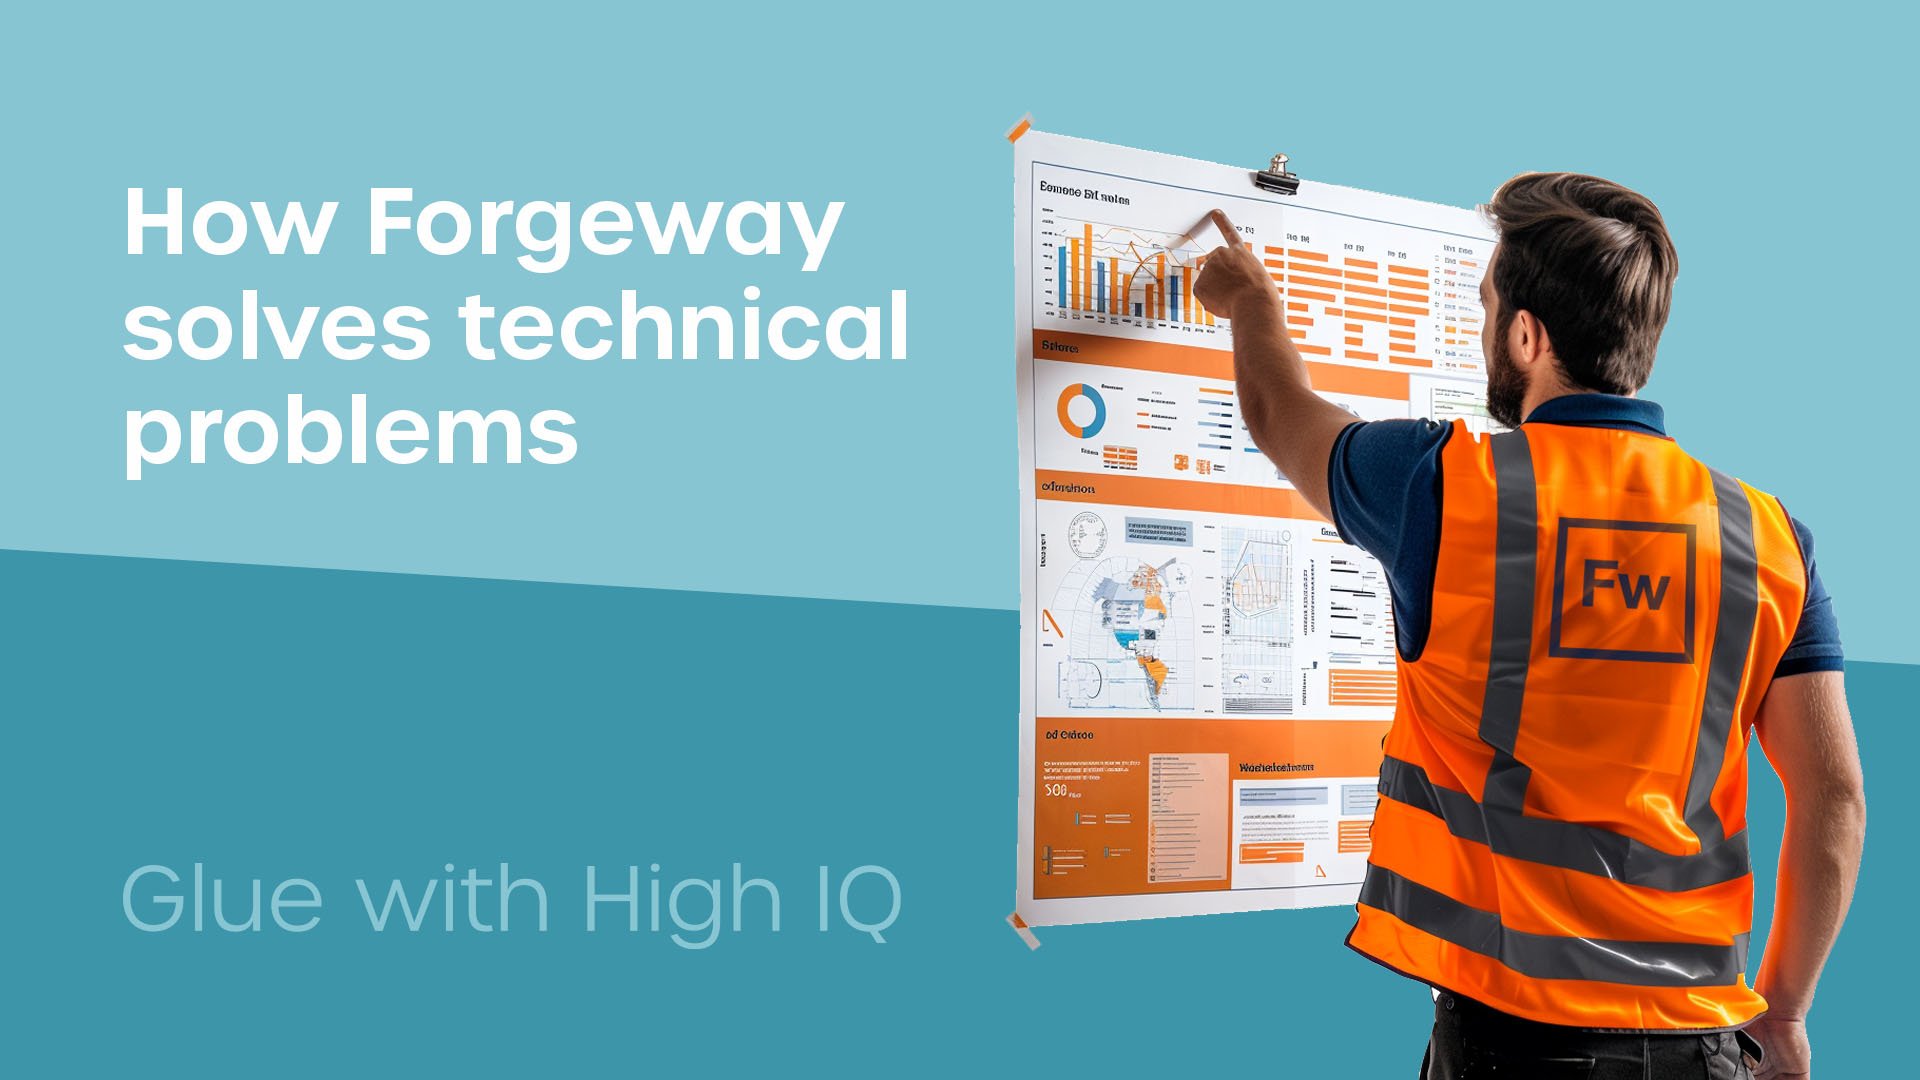 How does Forgeway solve technical problems?